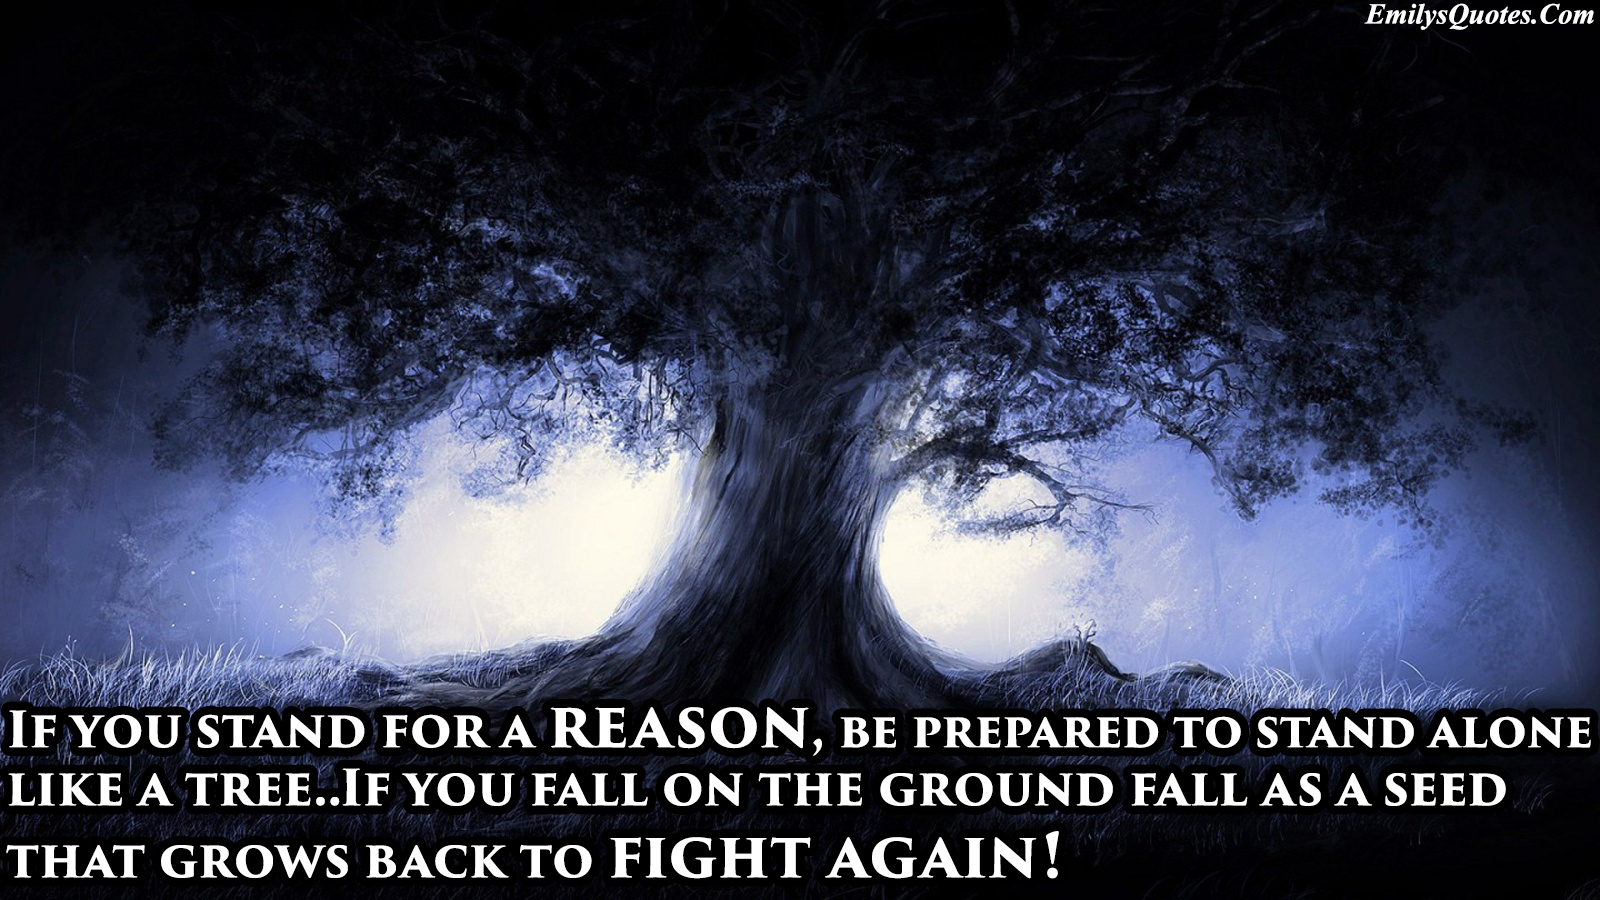 If you stand for a Reason, be prepared to stand alone like a Tree, And if you Fall